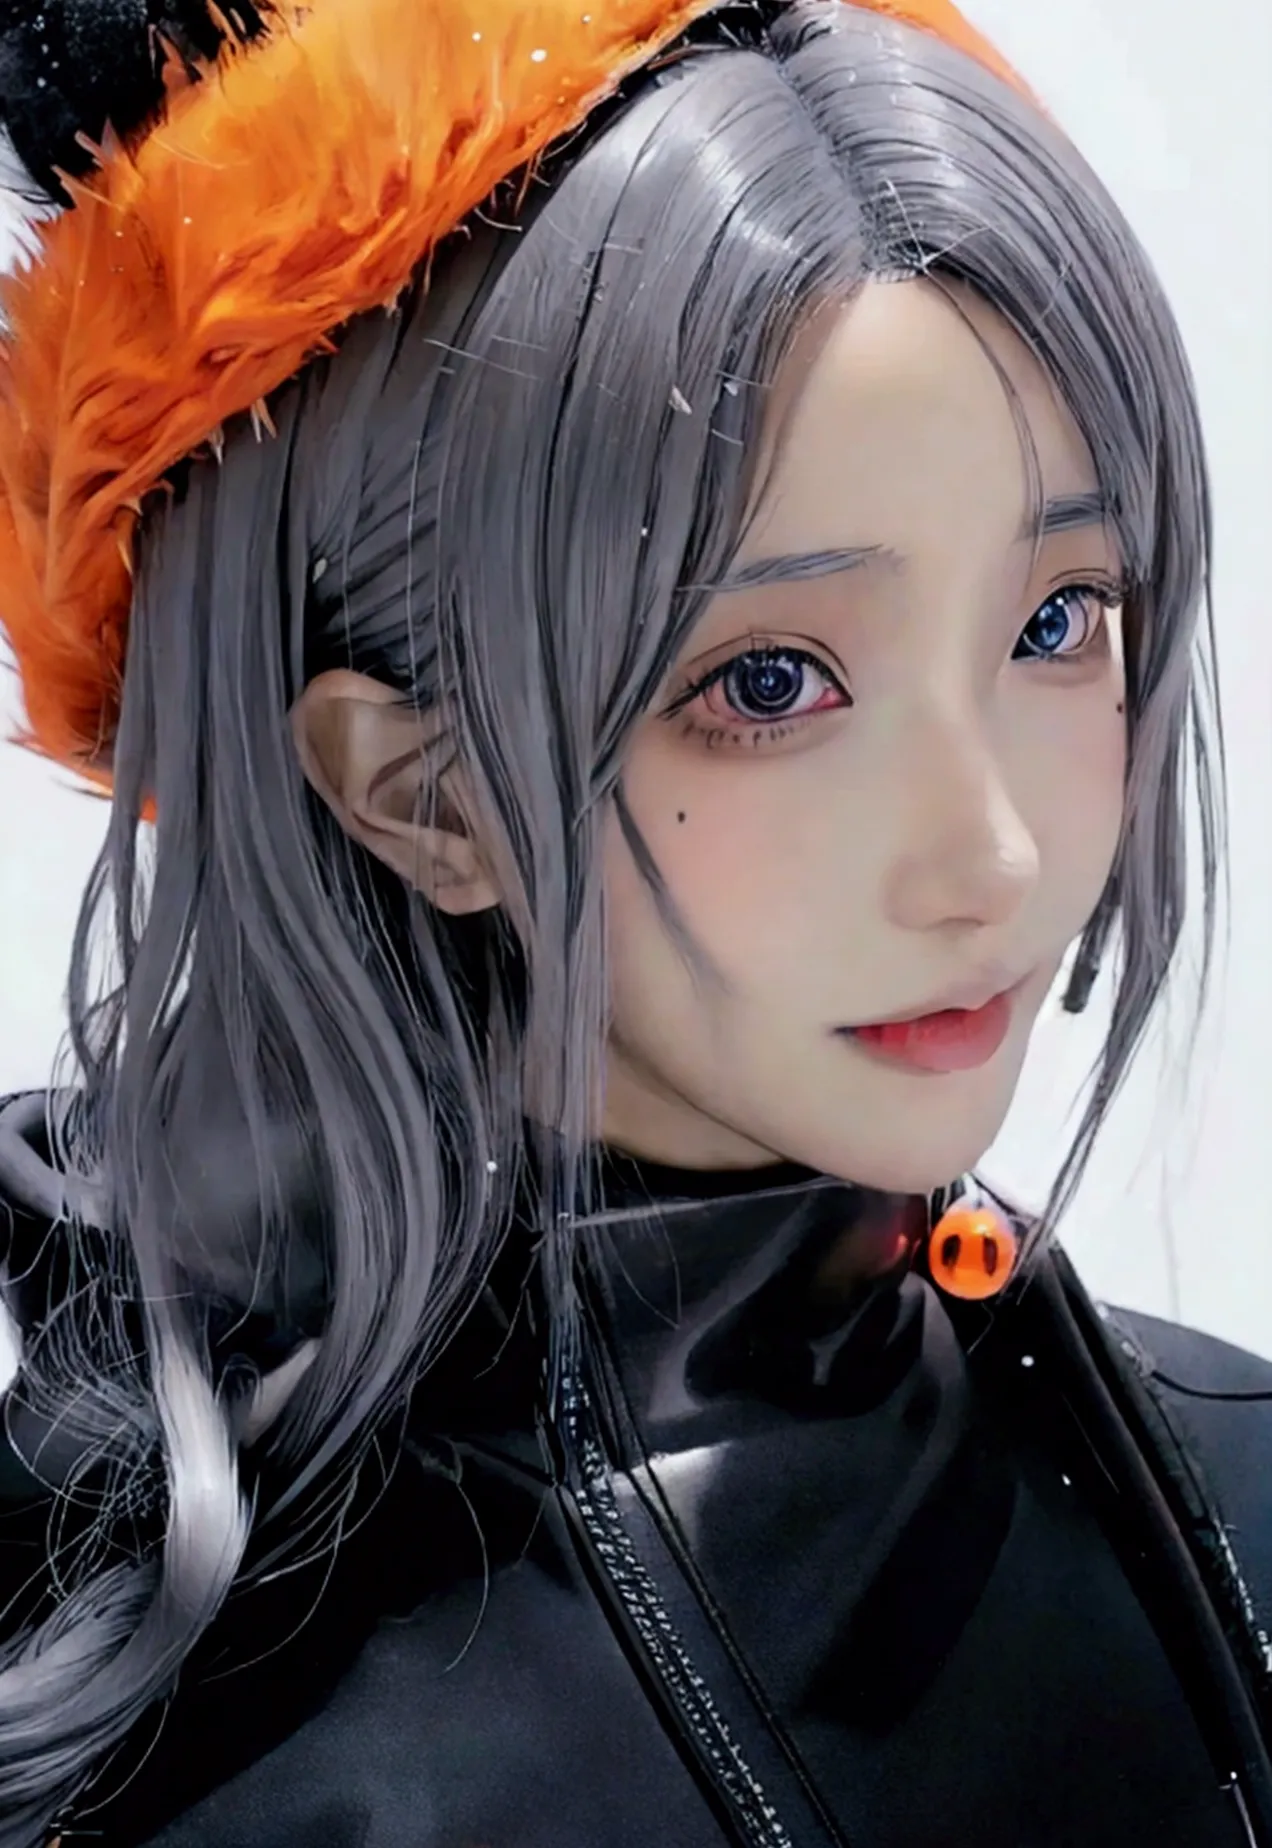 anime women with short grey hairs and black eyes wearing a orange coat, with dead look on her face an anime drawing by Kamagurka...